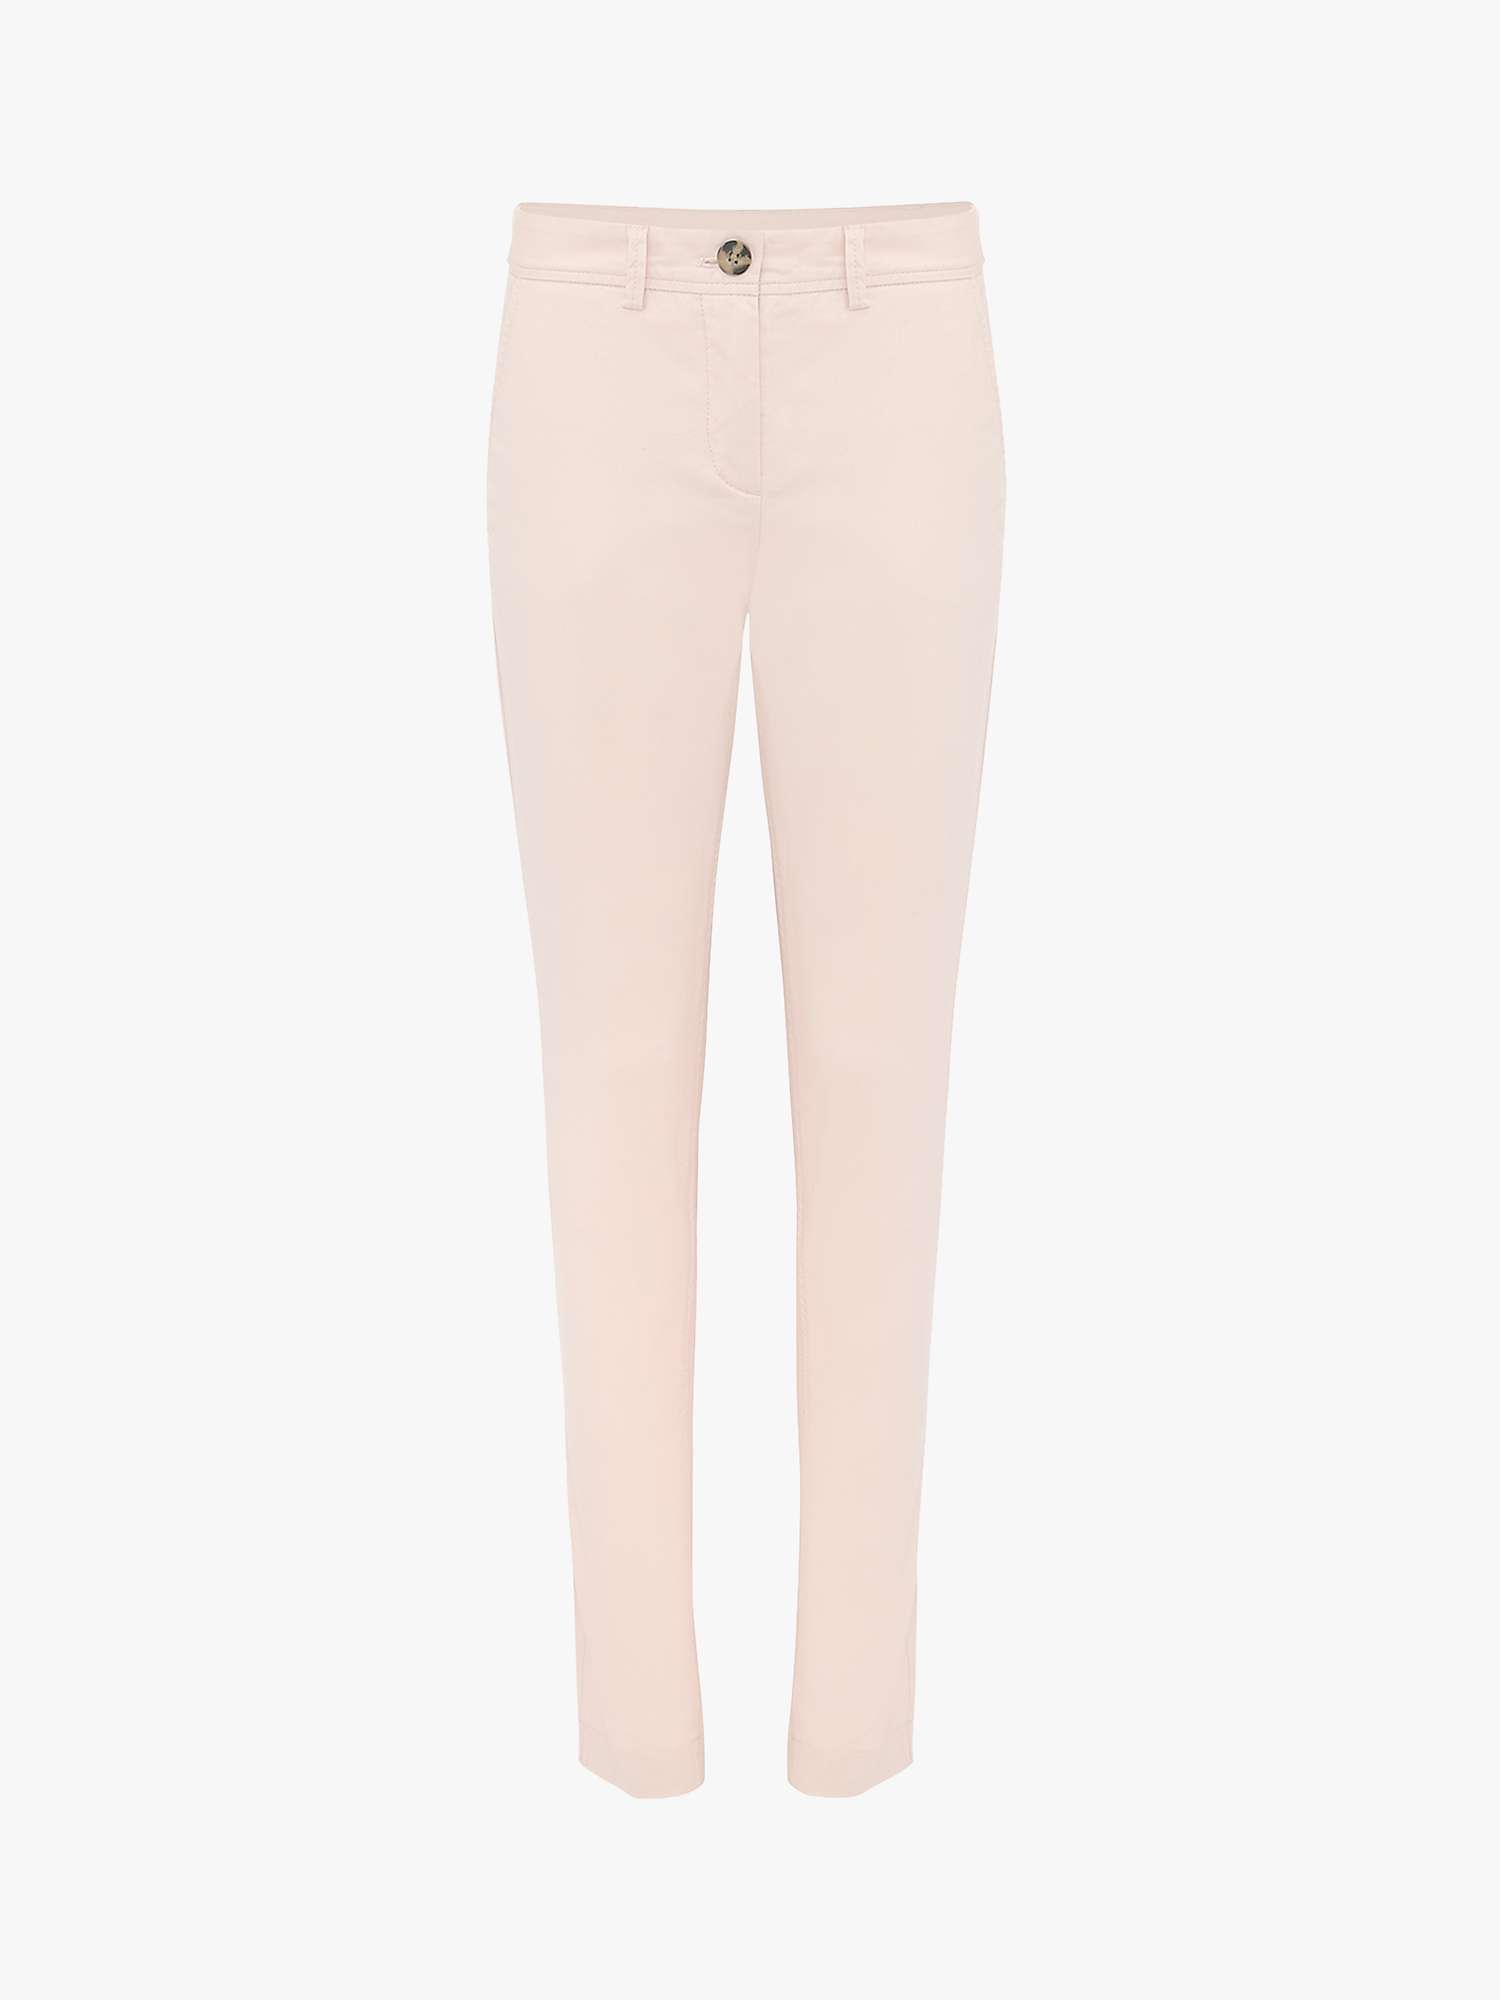 Buy Hobbs Pavilion Chino Trousers, Pale Pink Online at johnlewis.com